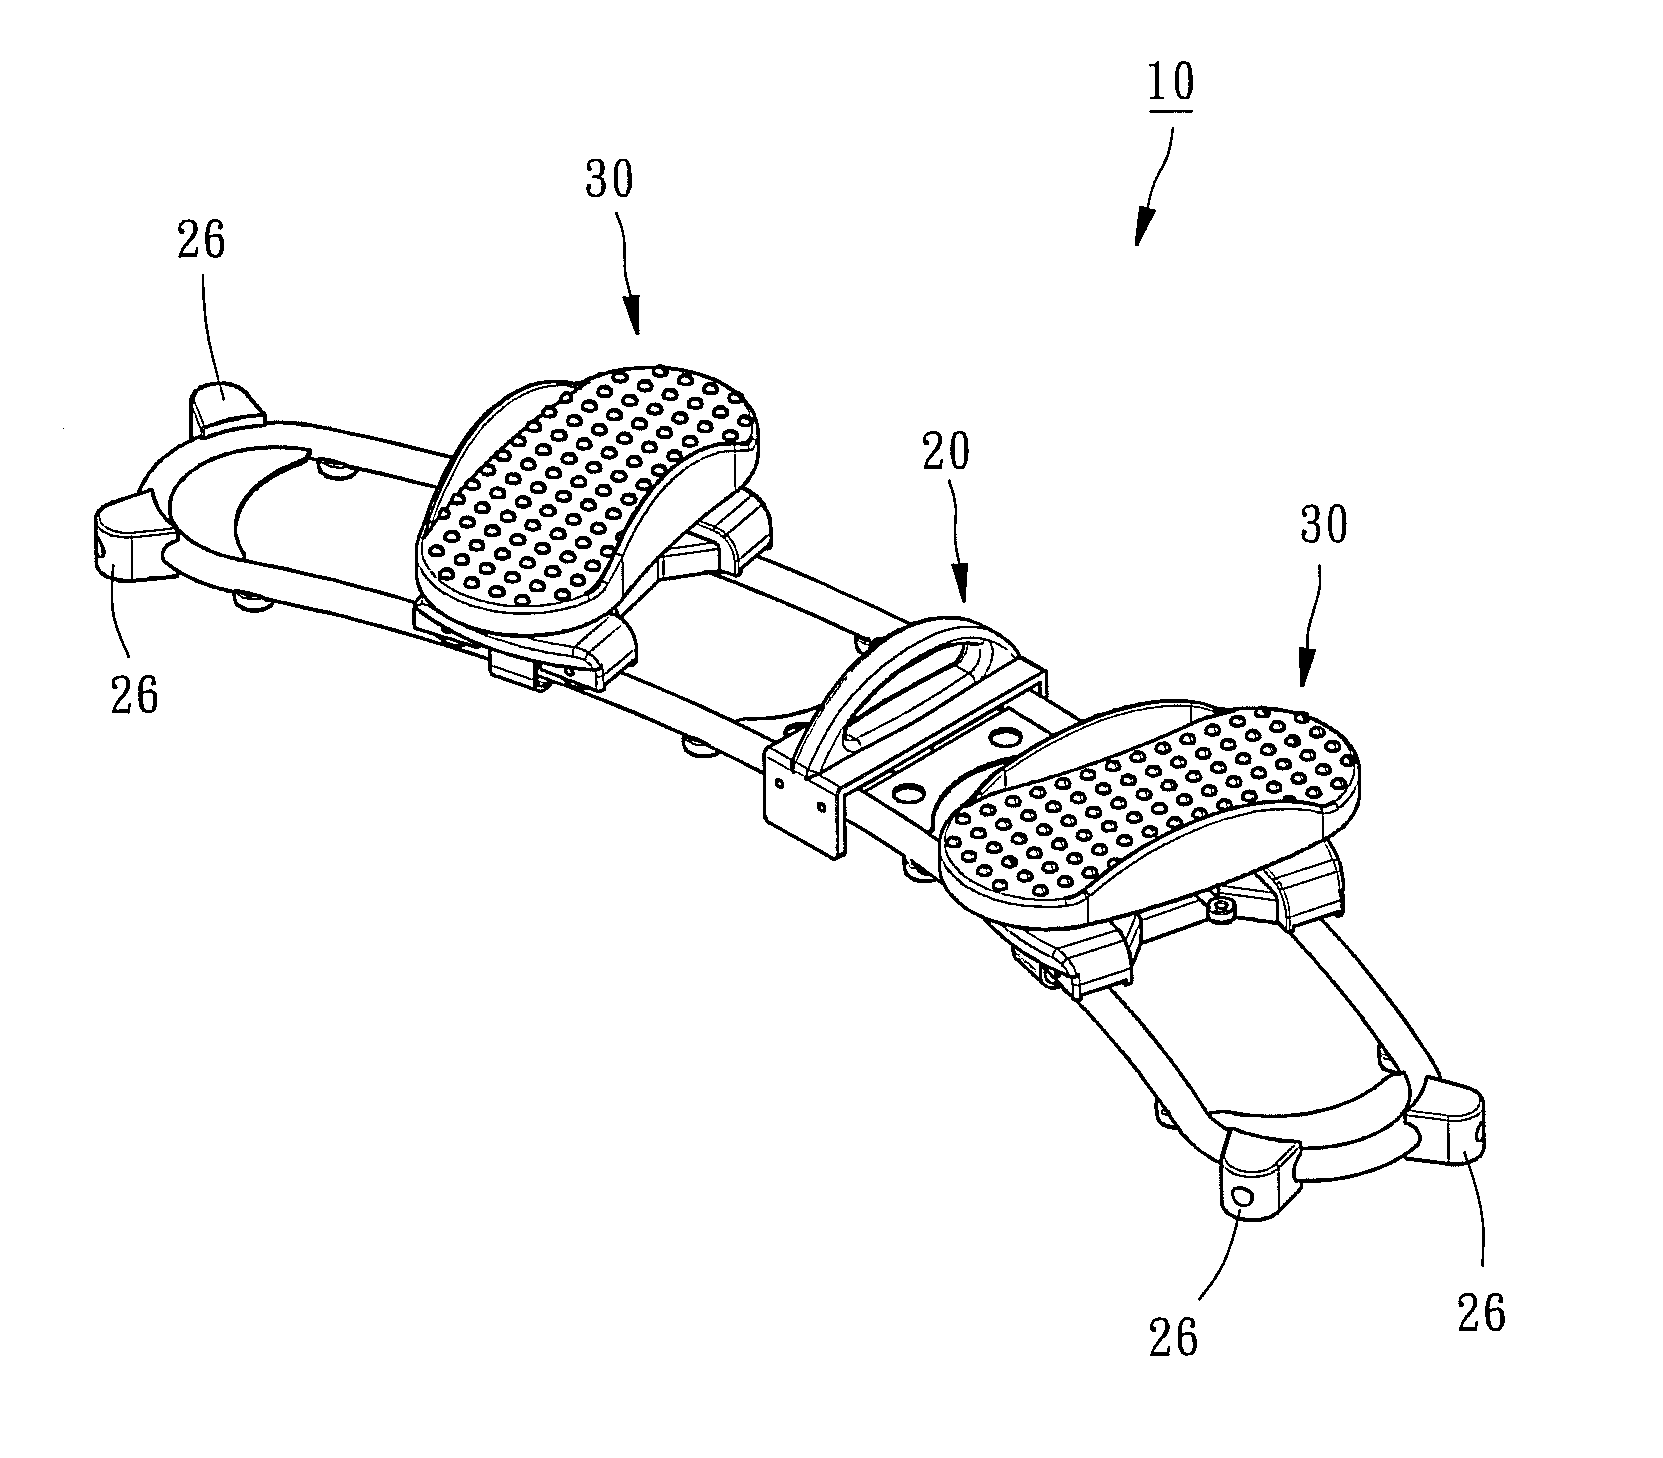 Thigh exercise device